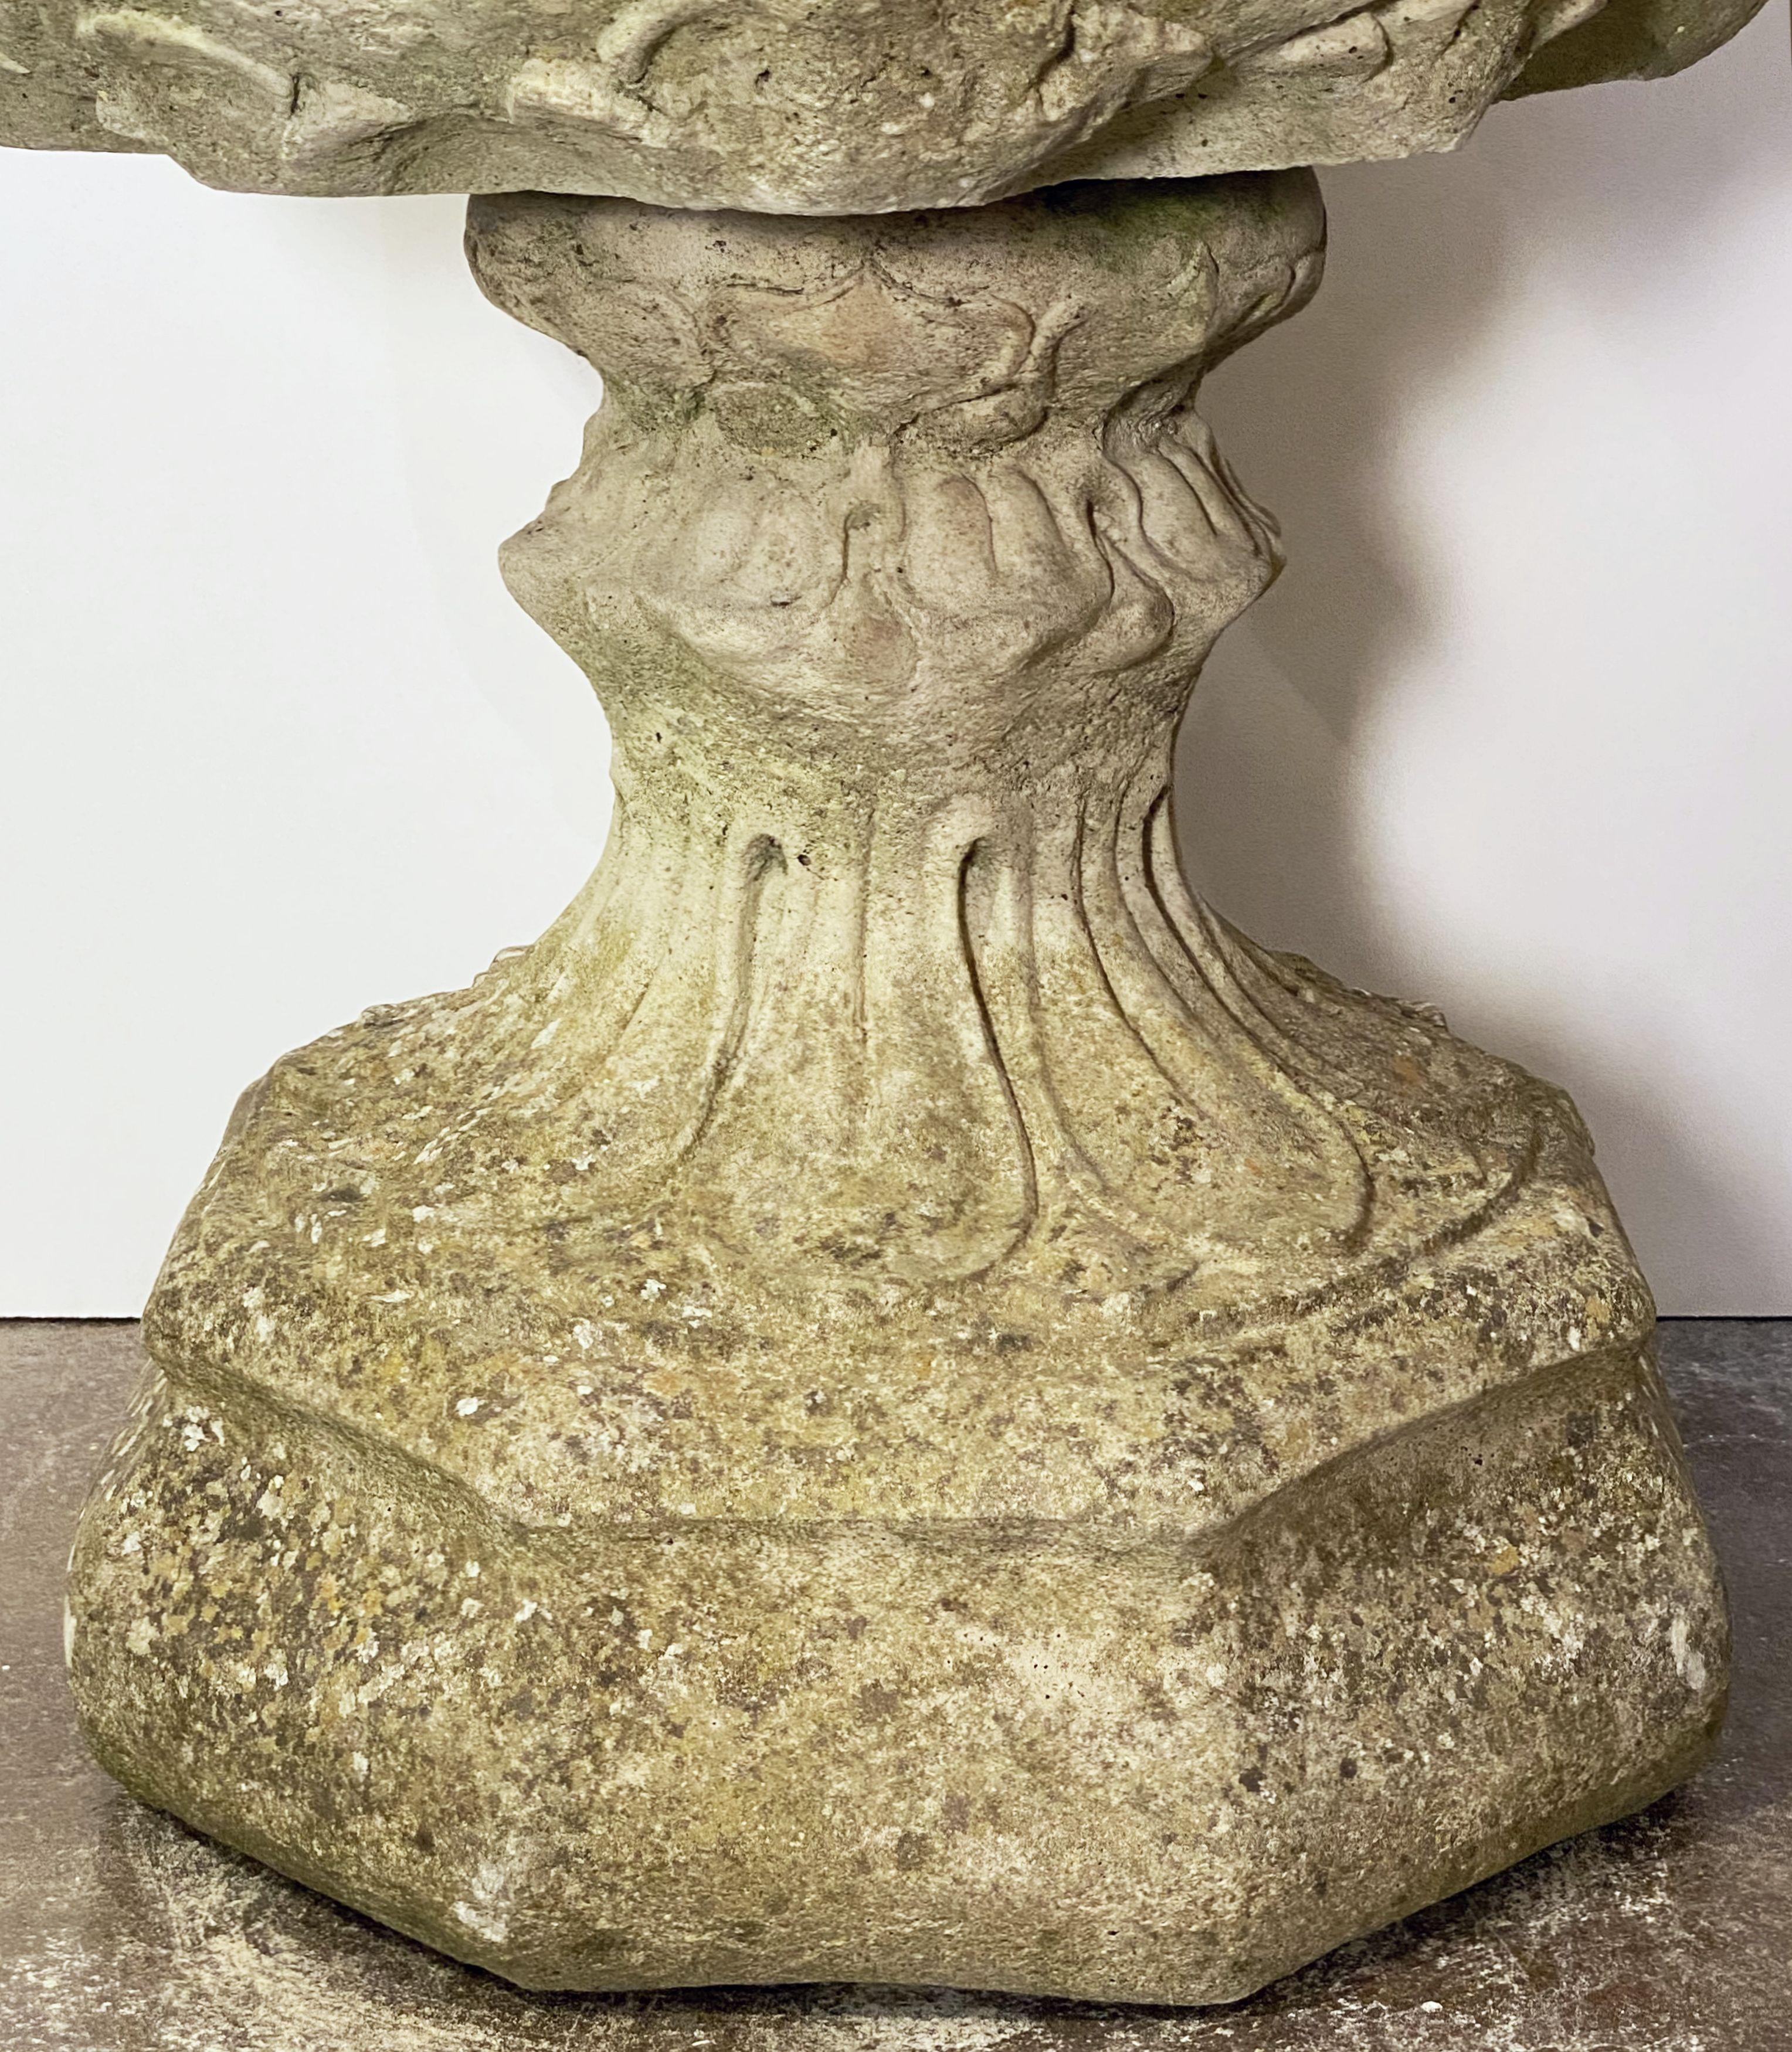 Cast Stone English Garden Stone Urn or Planter Pot on Plinth with Acanthus Leaf Design